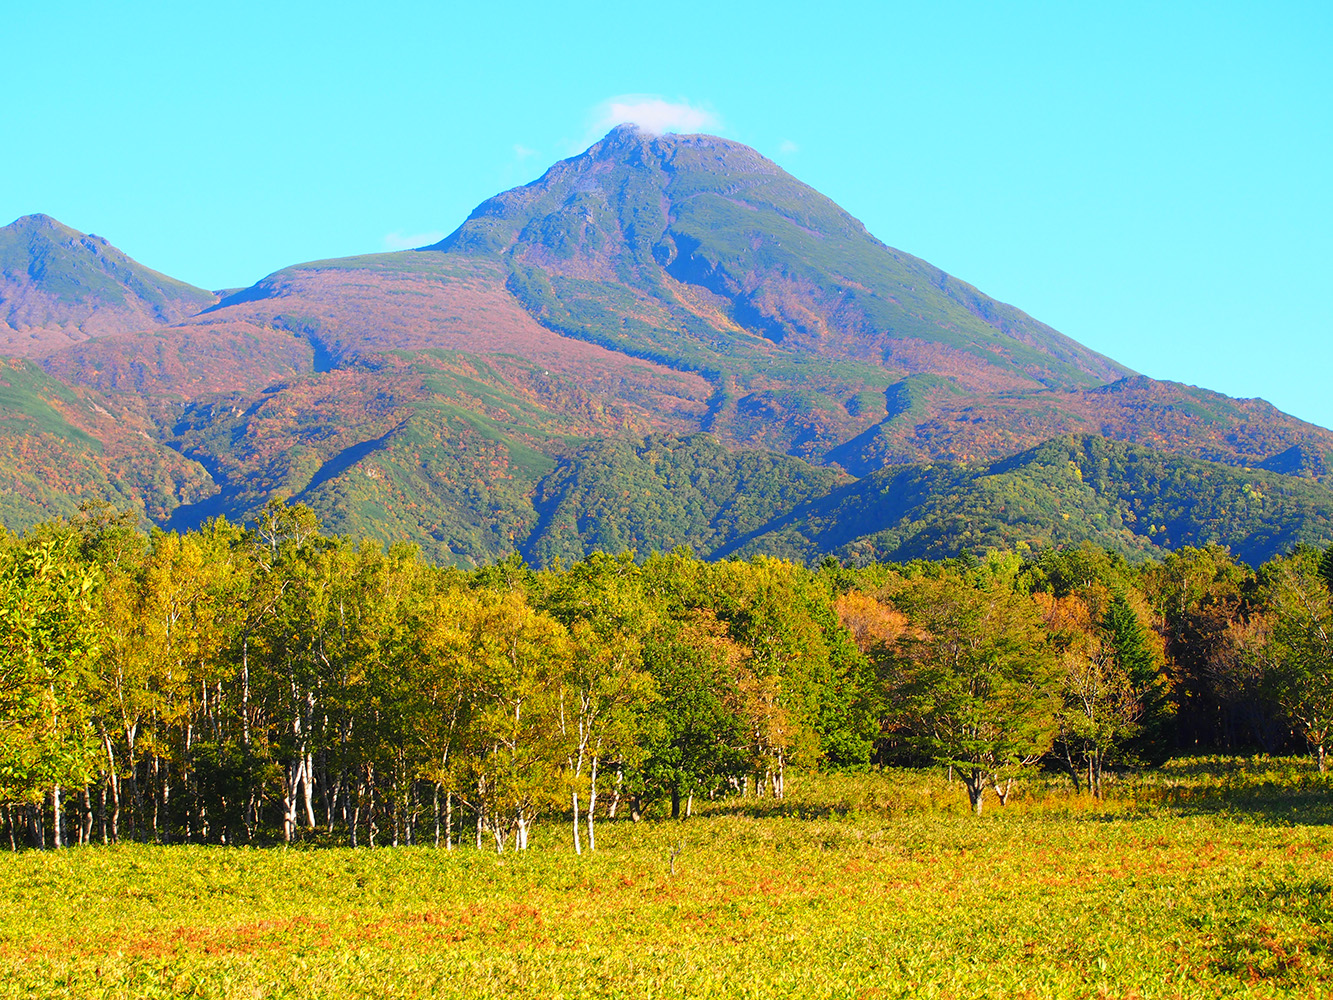 Photograph of a mountain, forest and grassland in Shiretoko National Park, taken by one of the researchers on a bright blue day.